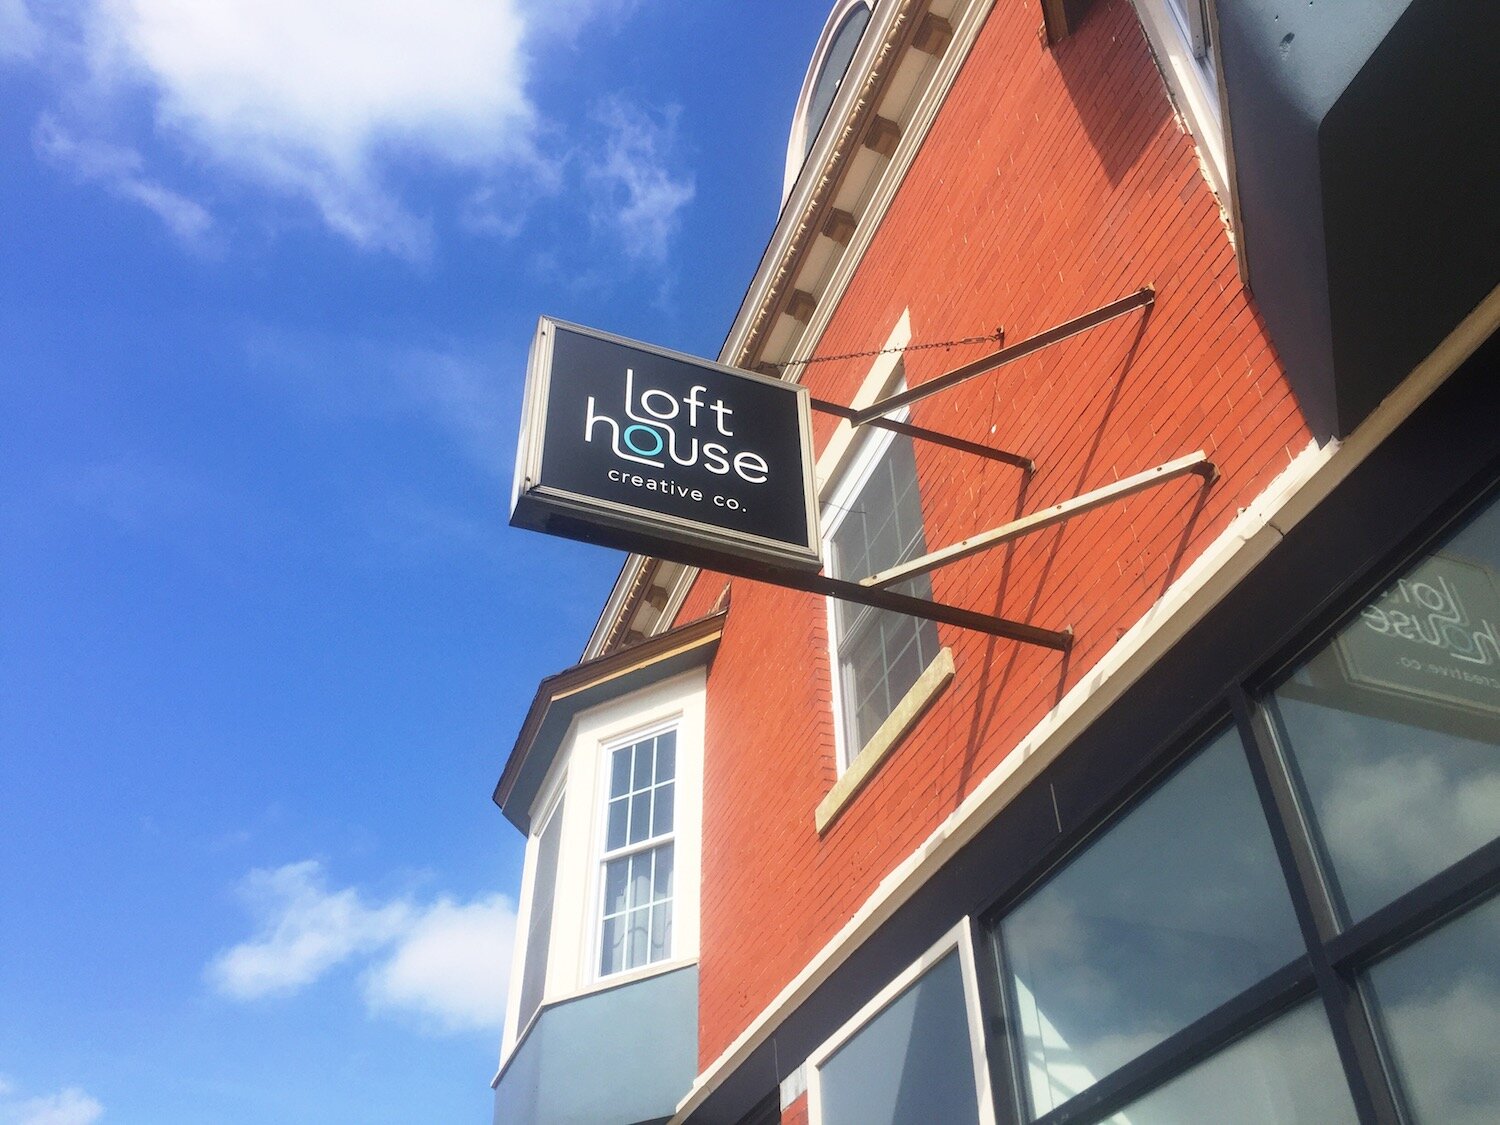 Lofthouse Creative Co. is located at 1434 N Wells St.